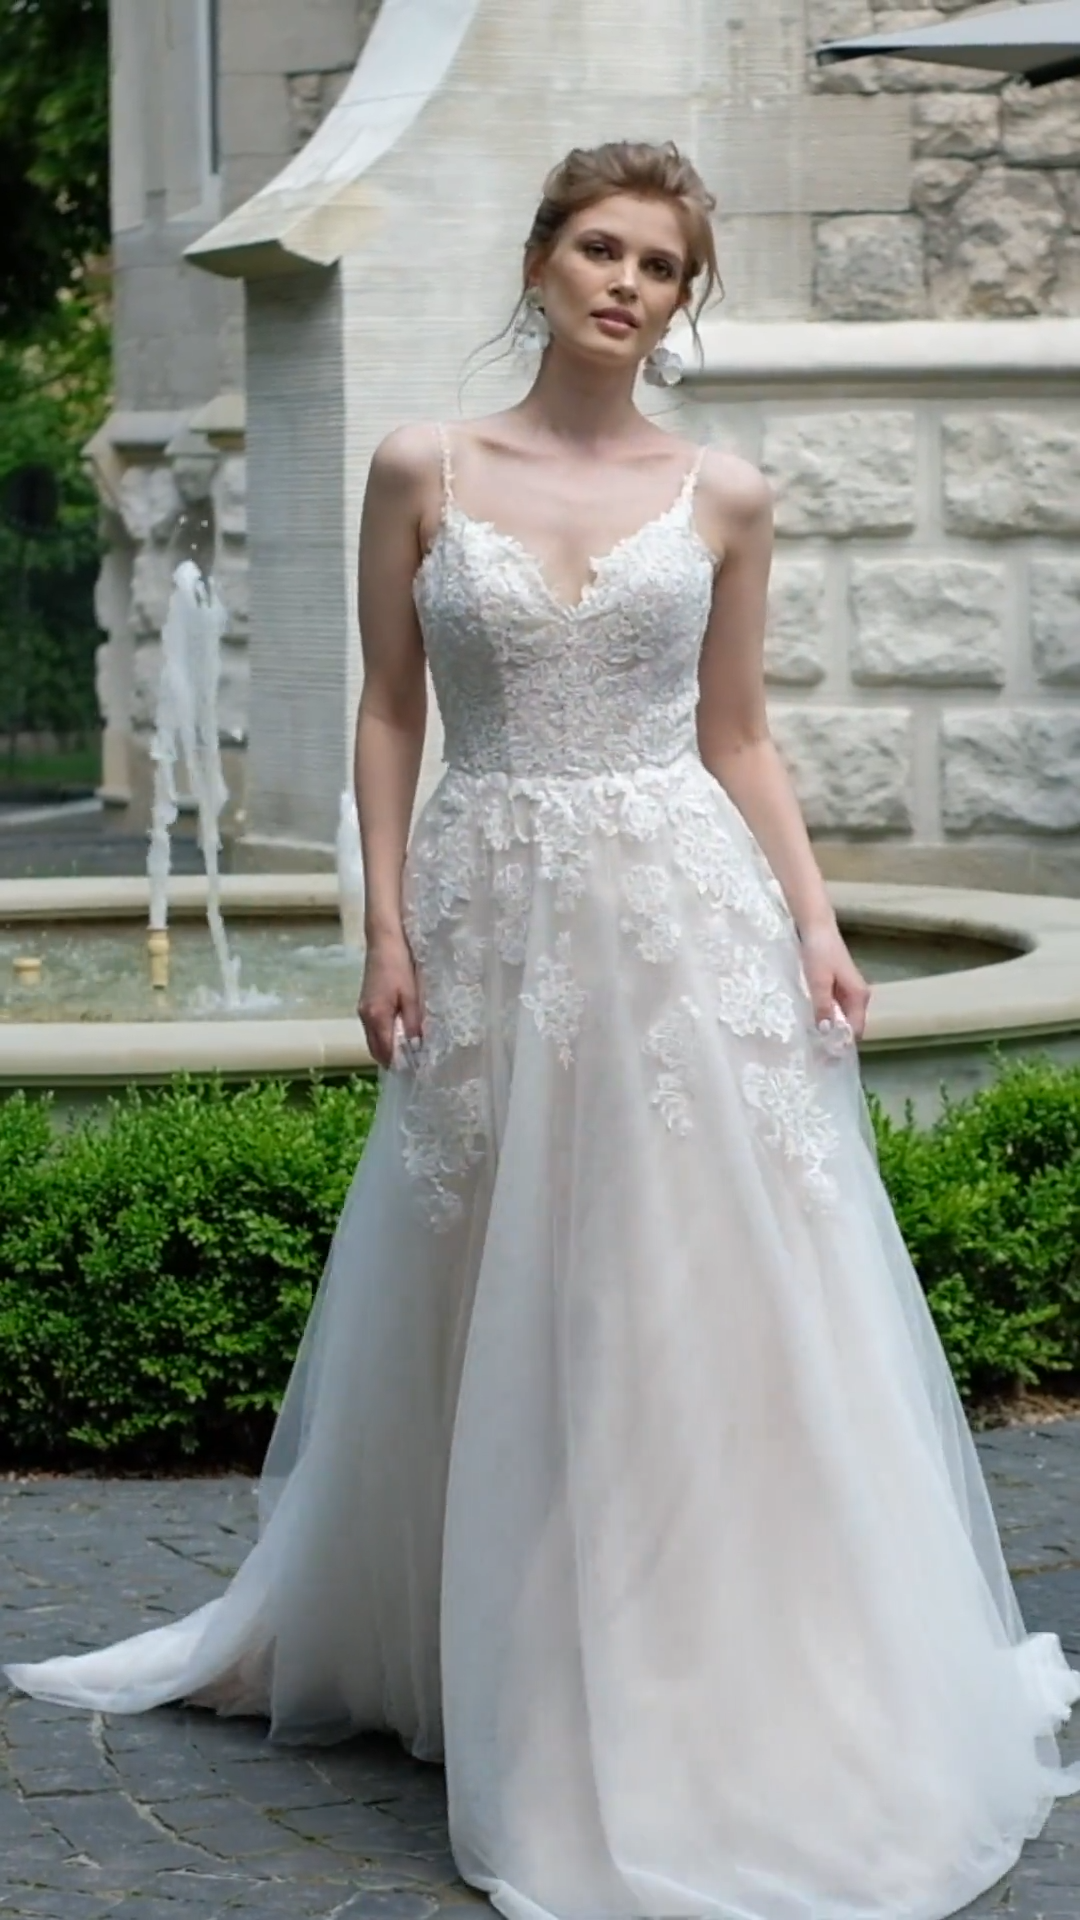 Moonlight Tango T958 affordable bridal gowns for the budget bride